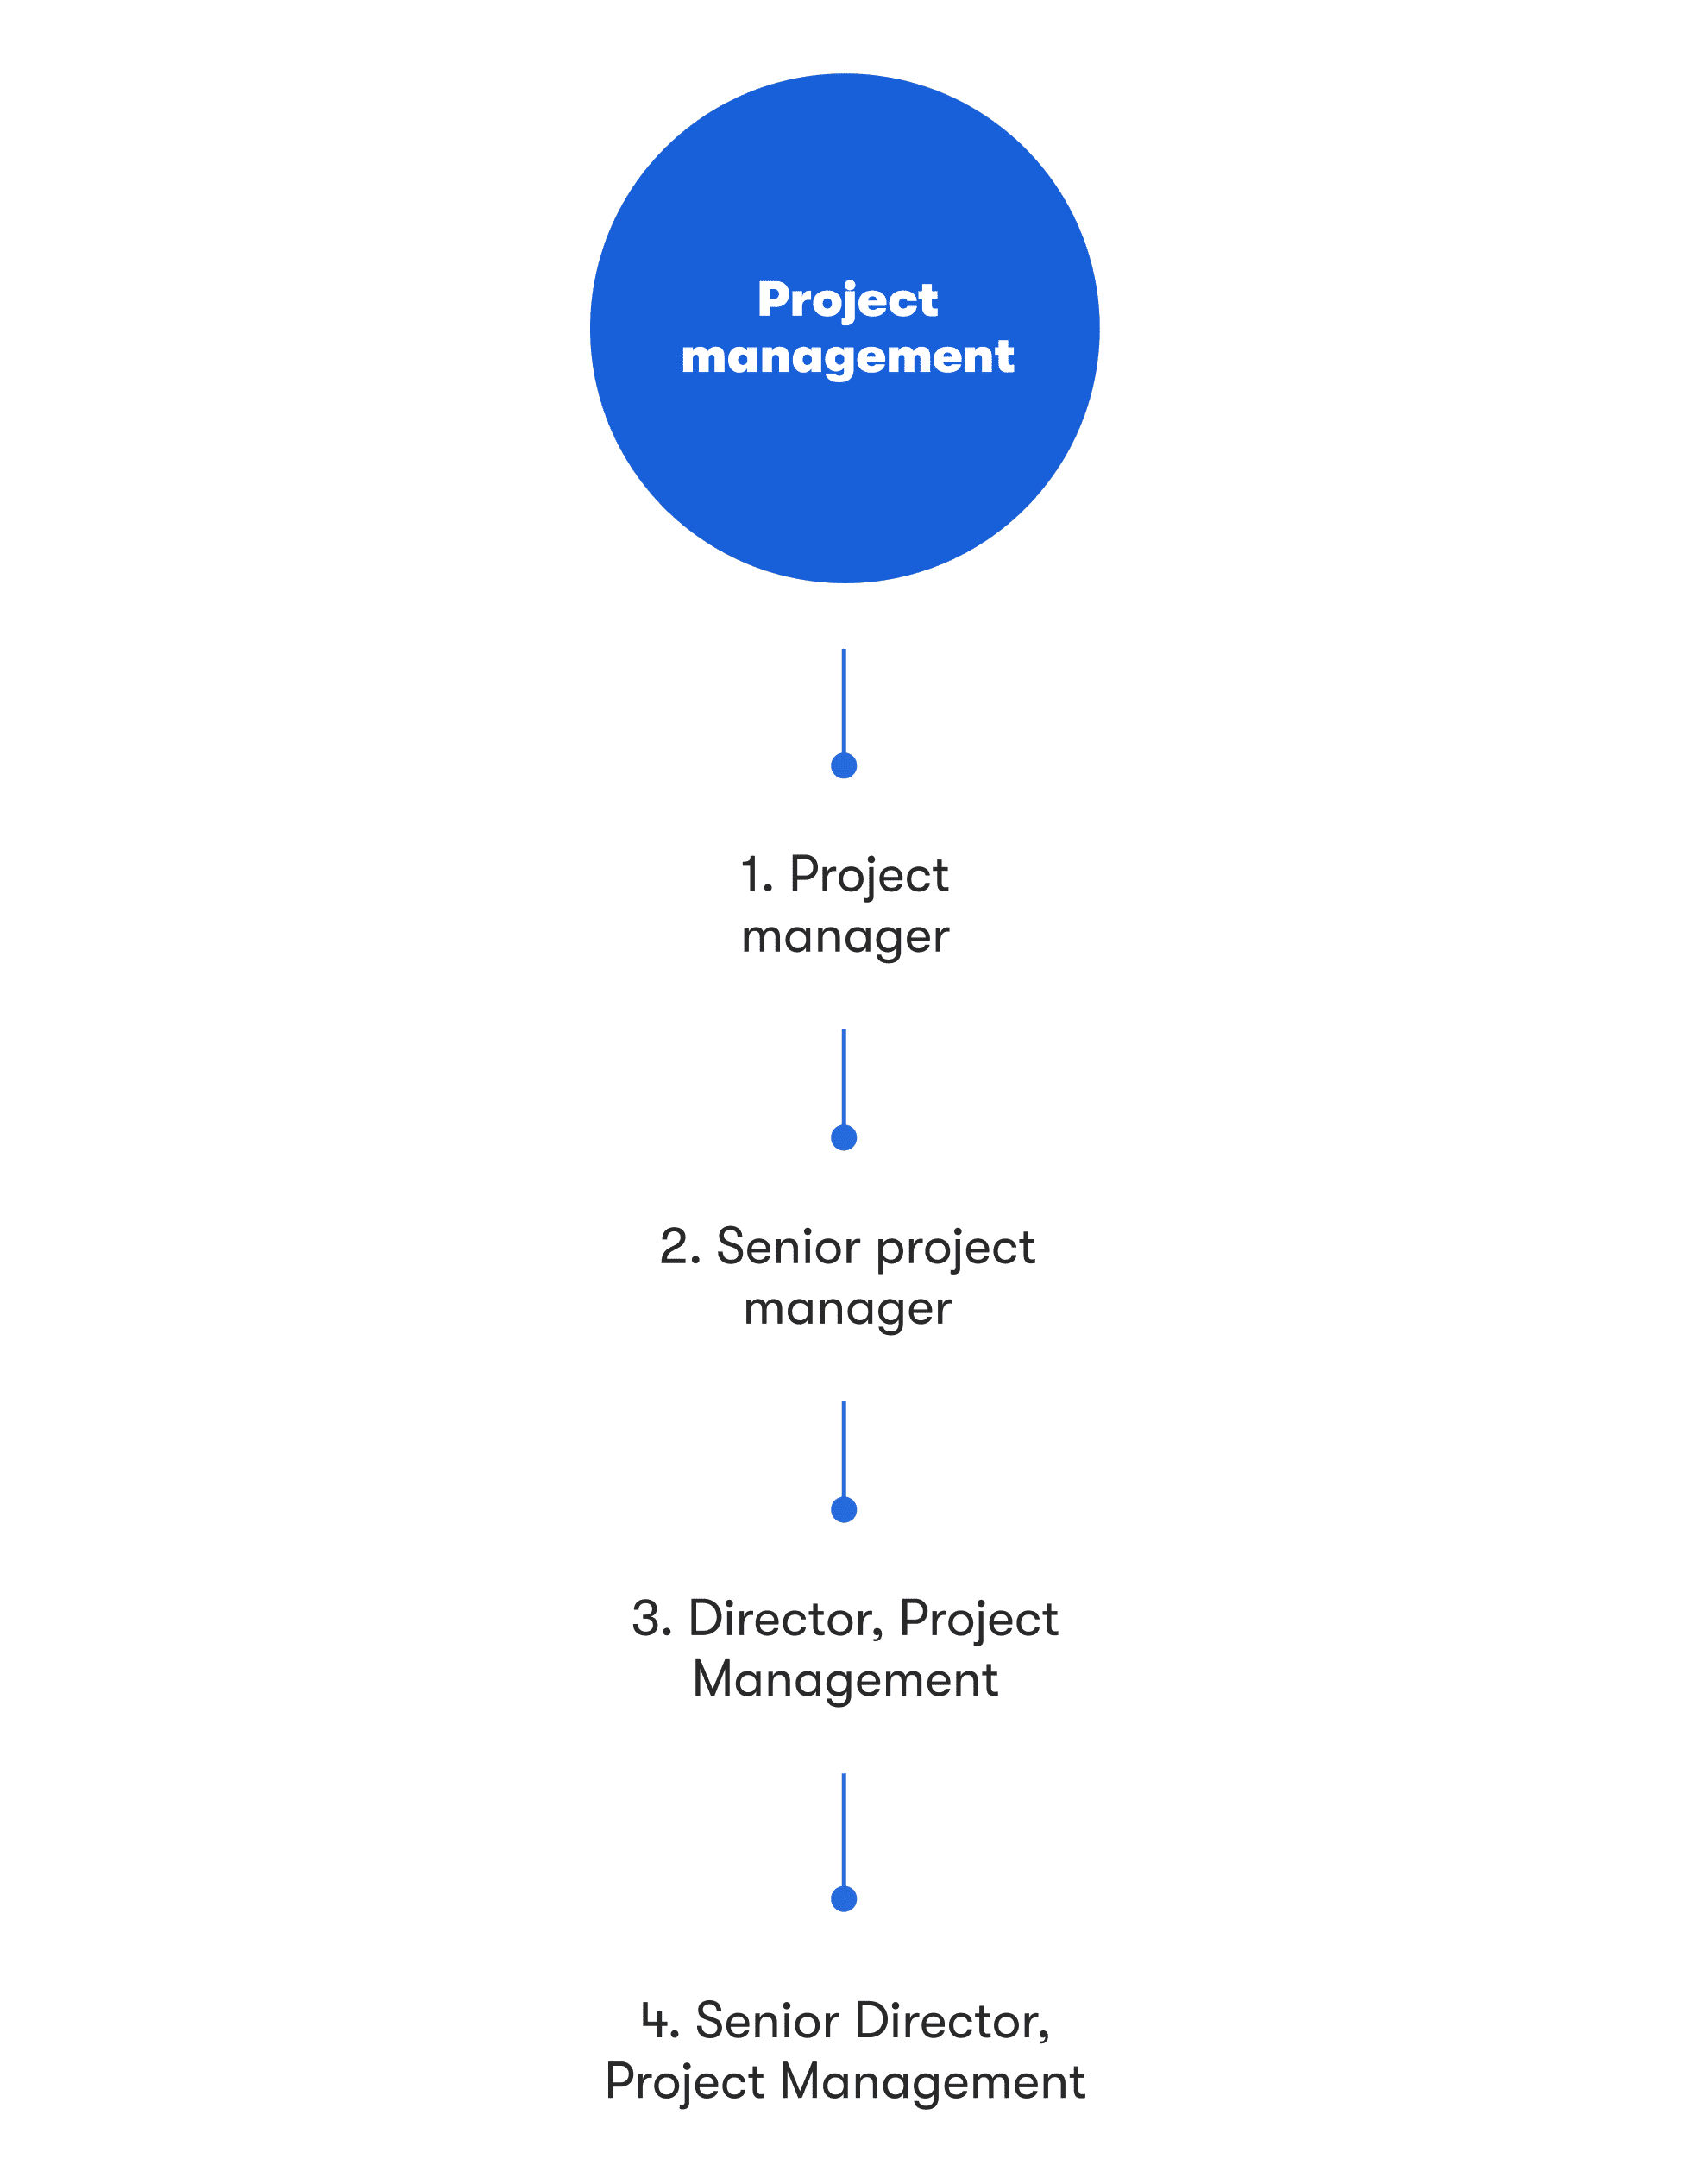 Project management career path